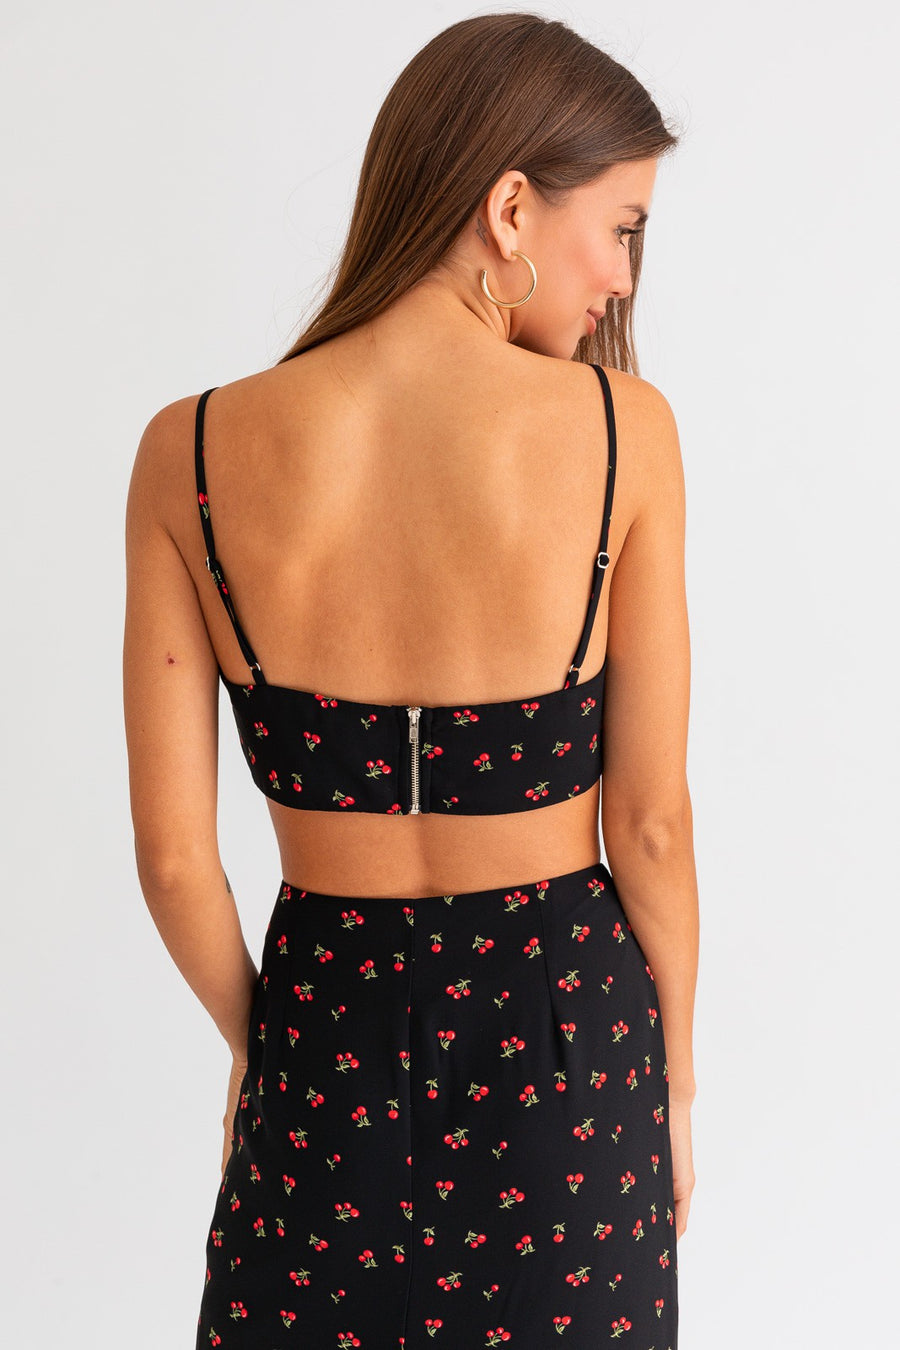 Cropped tank with cherries in the color black-red.